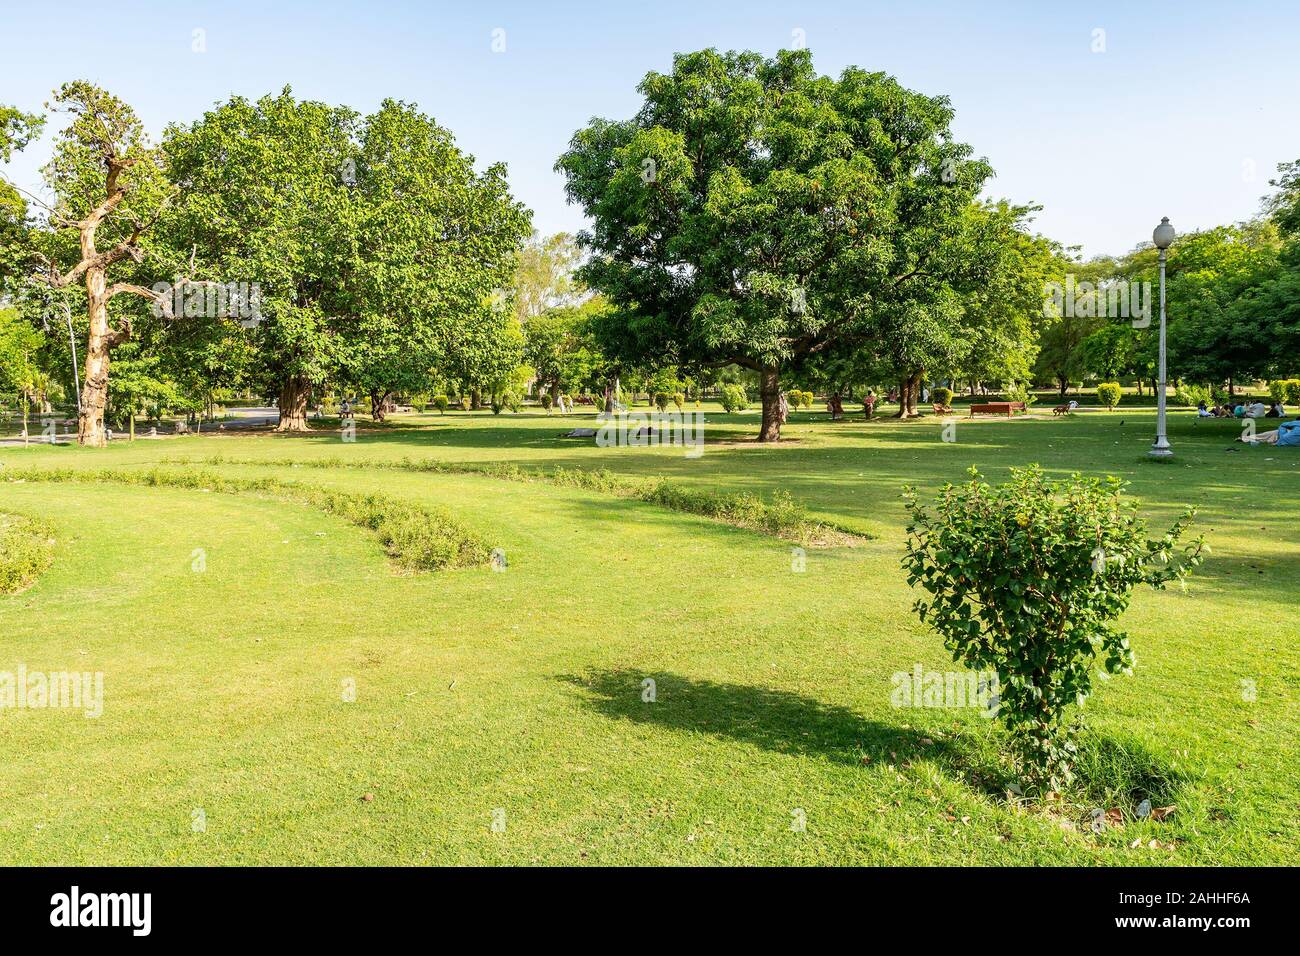 Lahore Bagh-e-Jinnah Park Picturesque View of Grass and Trees on a Sunny Blue Sky Day Stock Photo